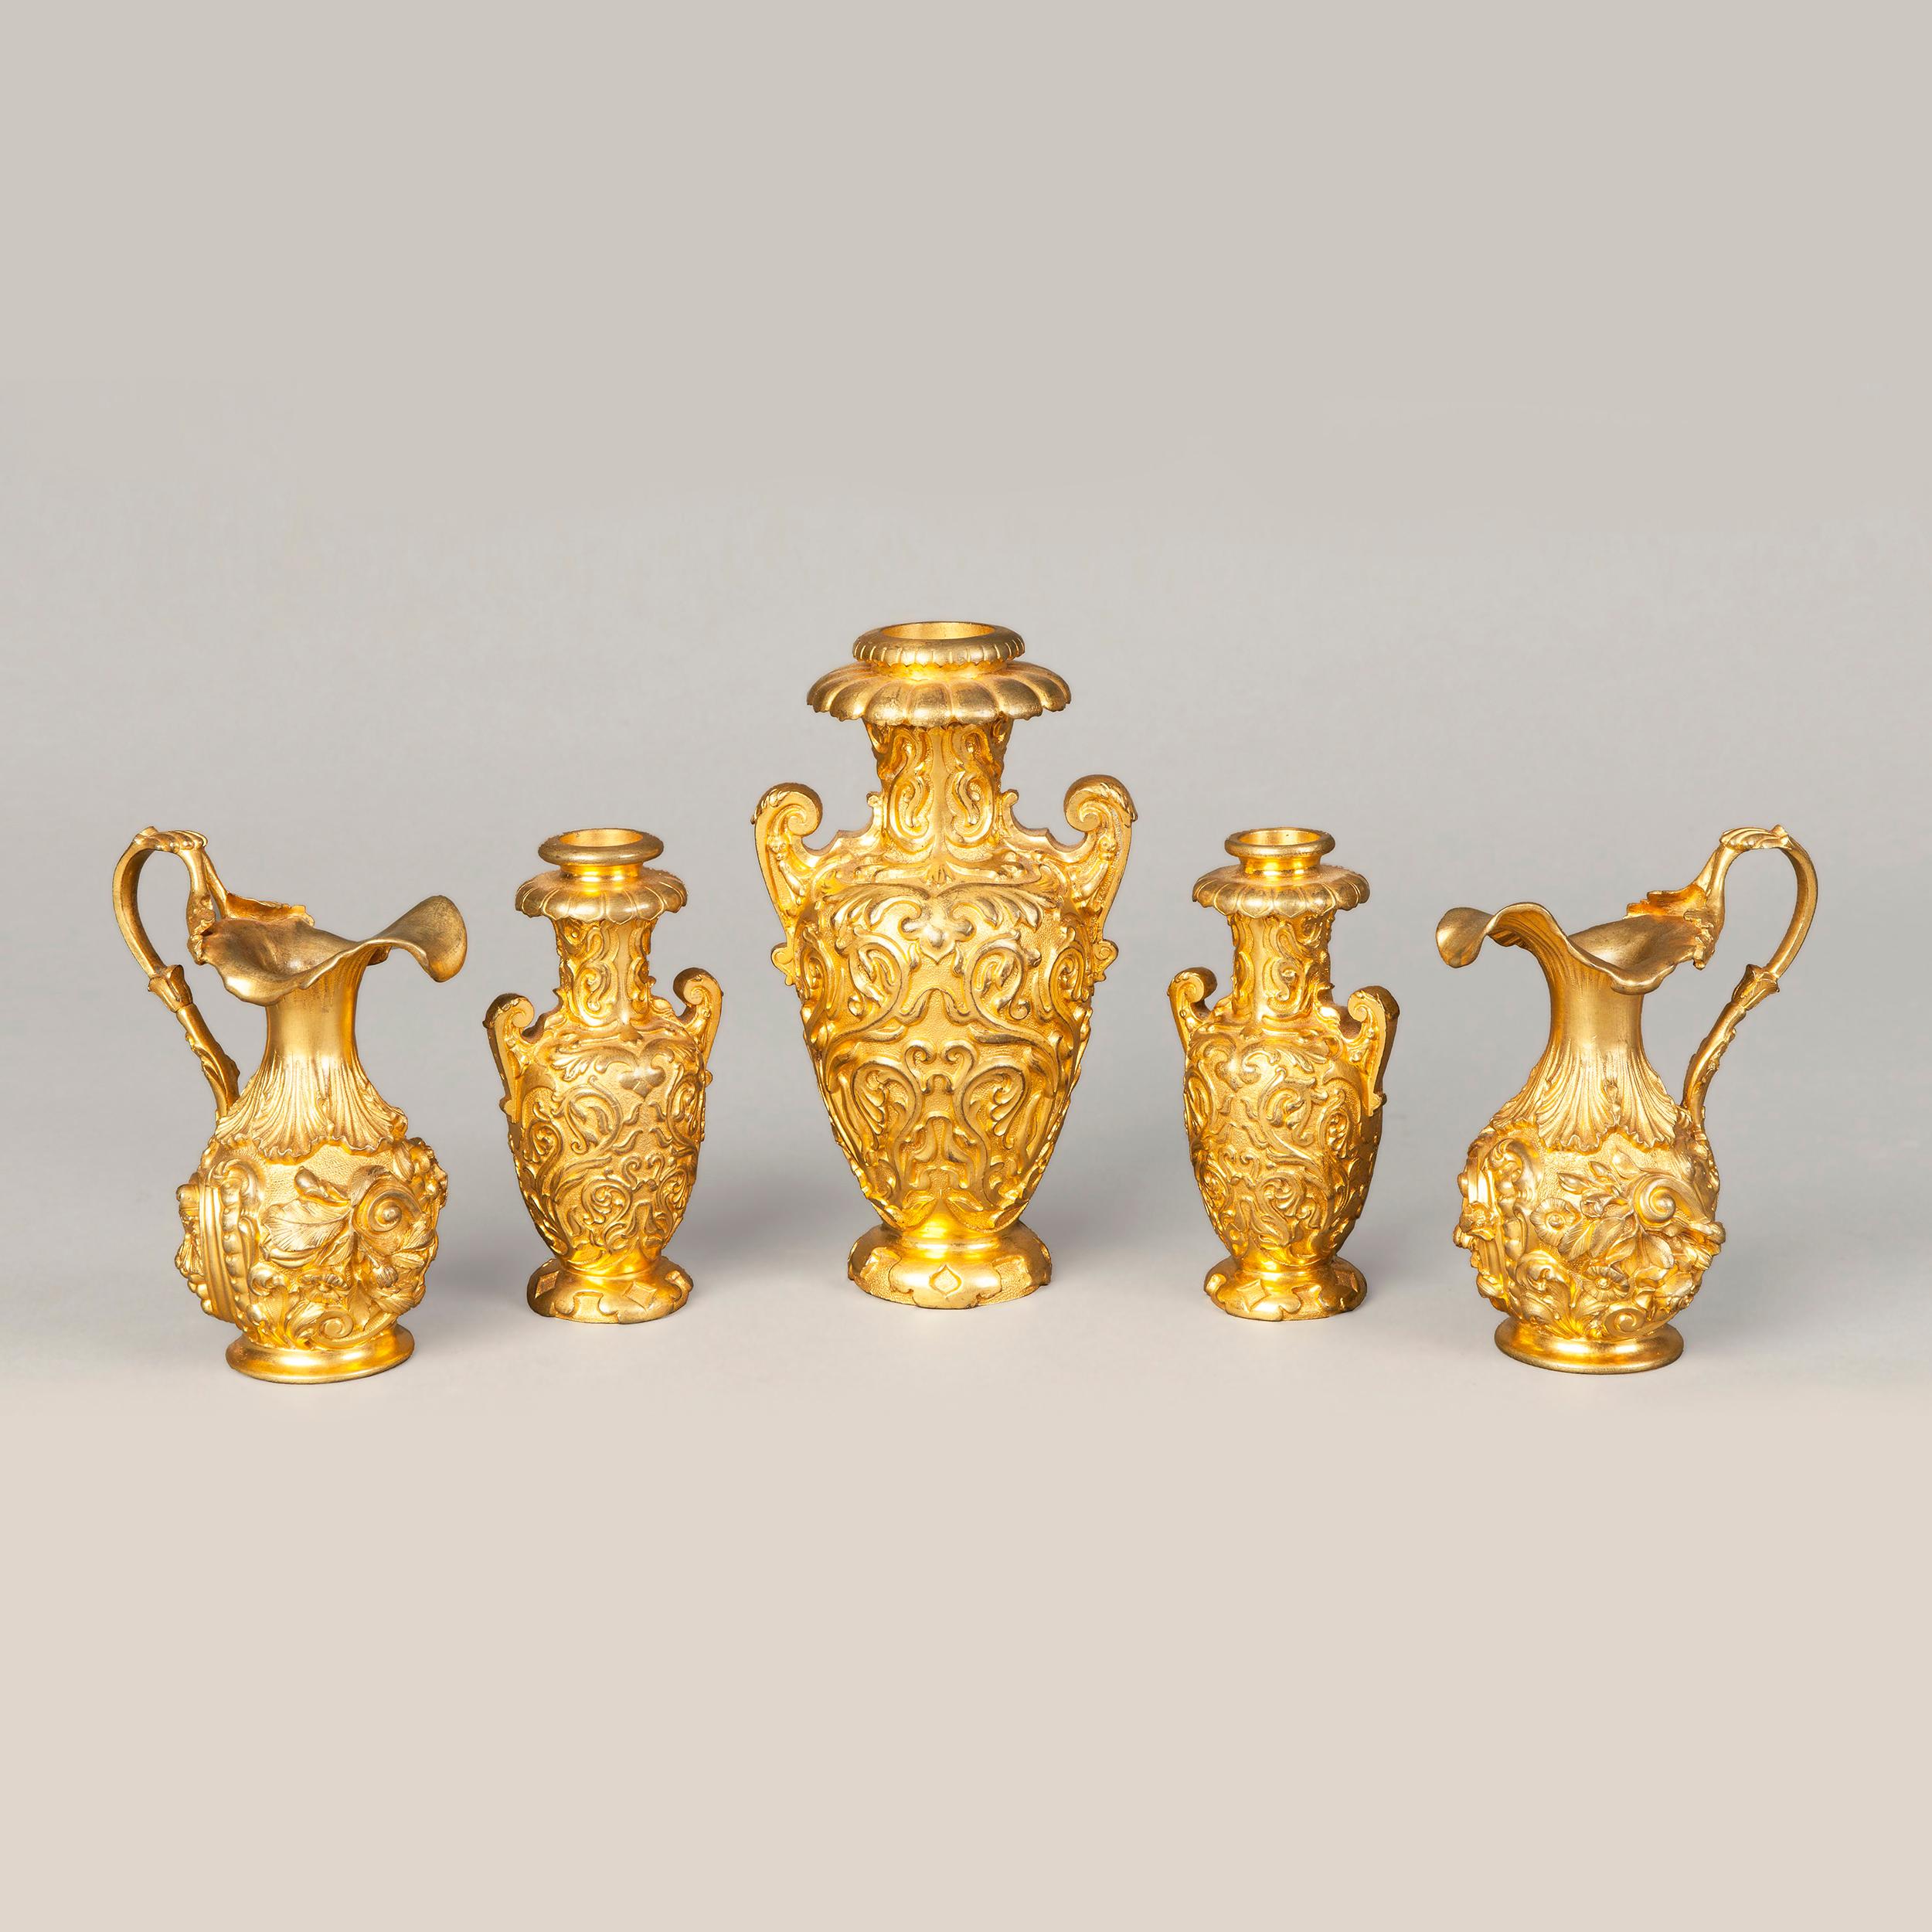 English 19th Century Gilt Bronze Collection of Decorative Urns For Sale 1